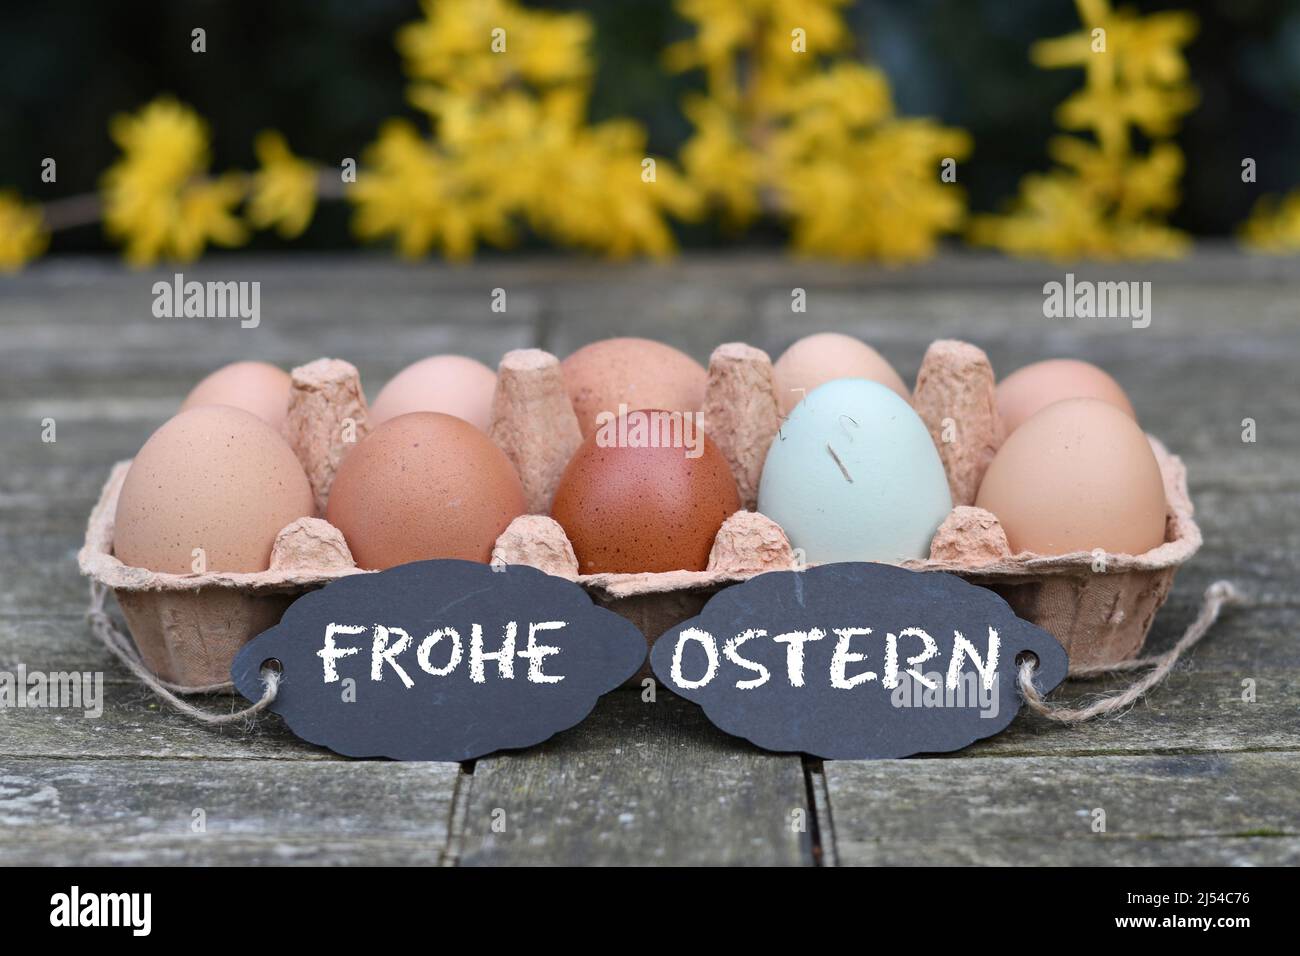 chalkboard with the inscription 'Frohe Ostern' in front of chicken eggs in the egg carton, Germany Stock Photo